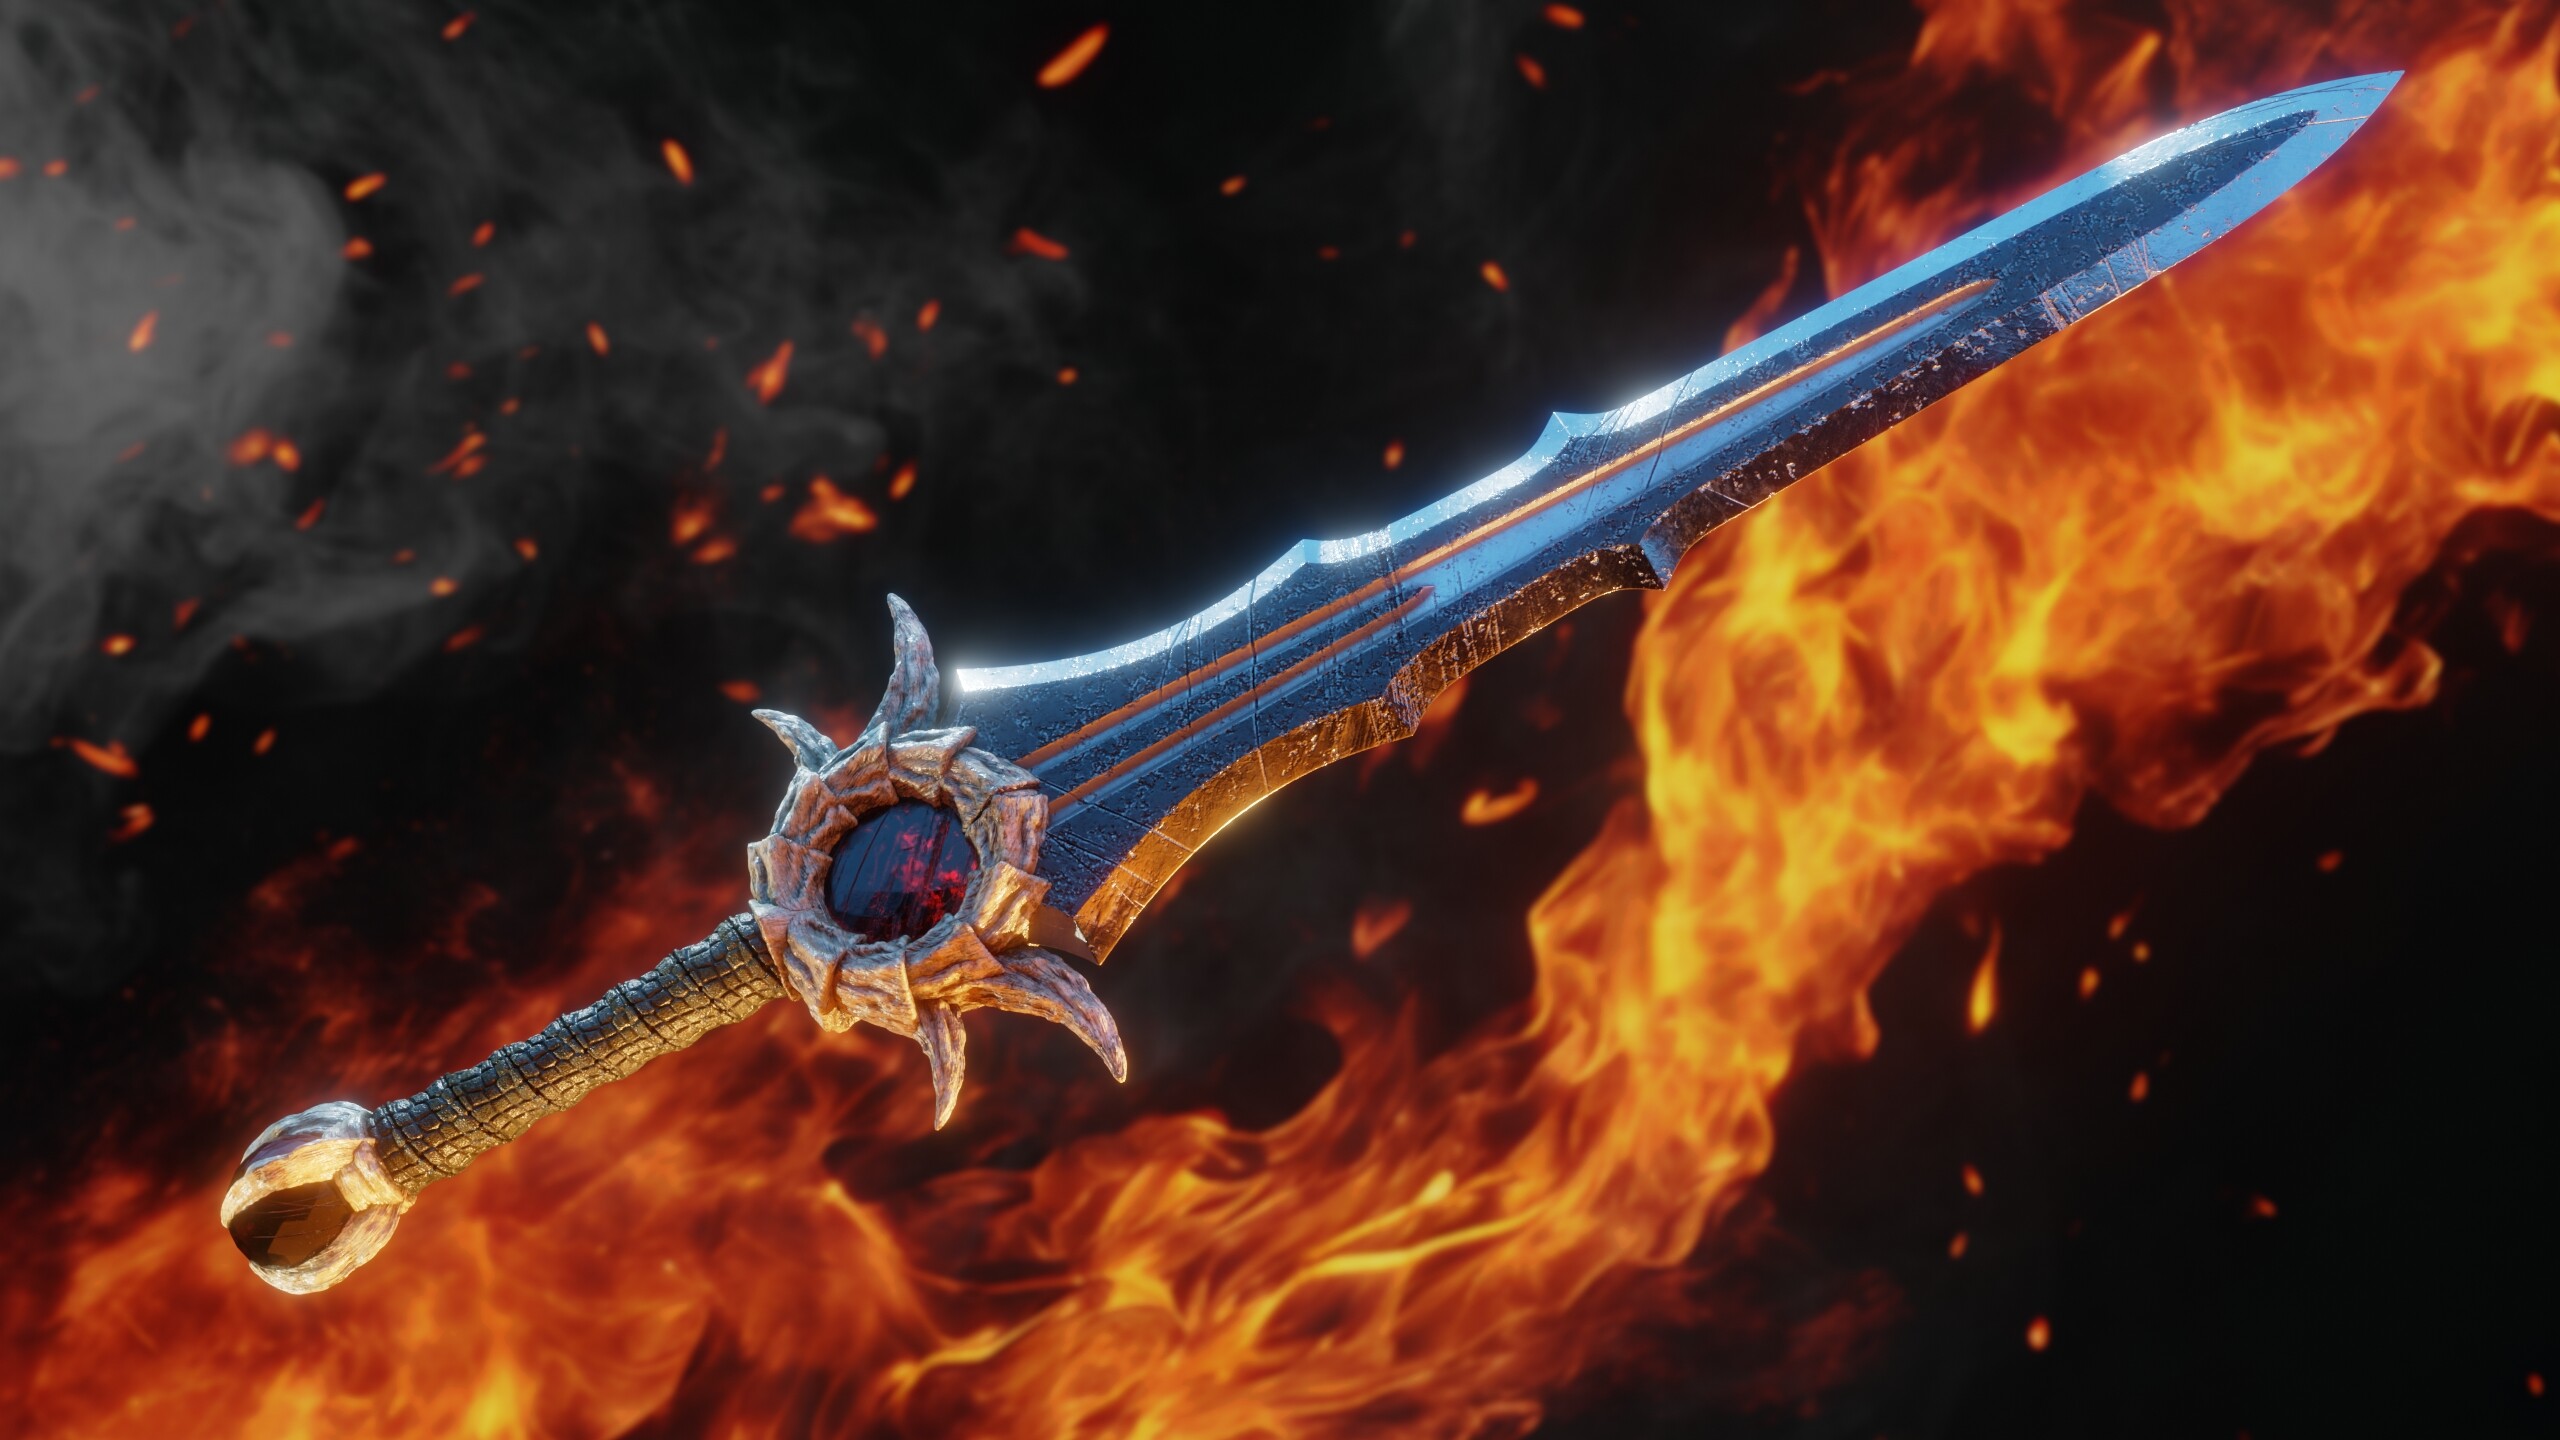 Dragon Slayer's Sword - Finished Projects - Blender Artists Community